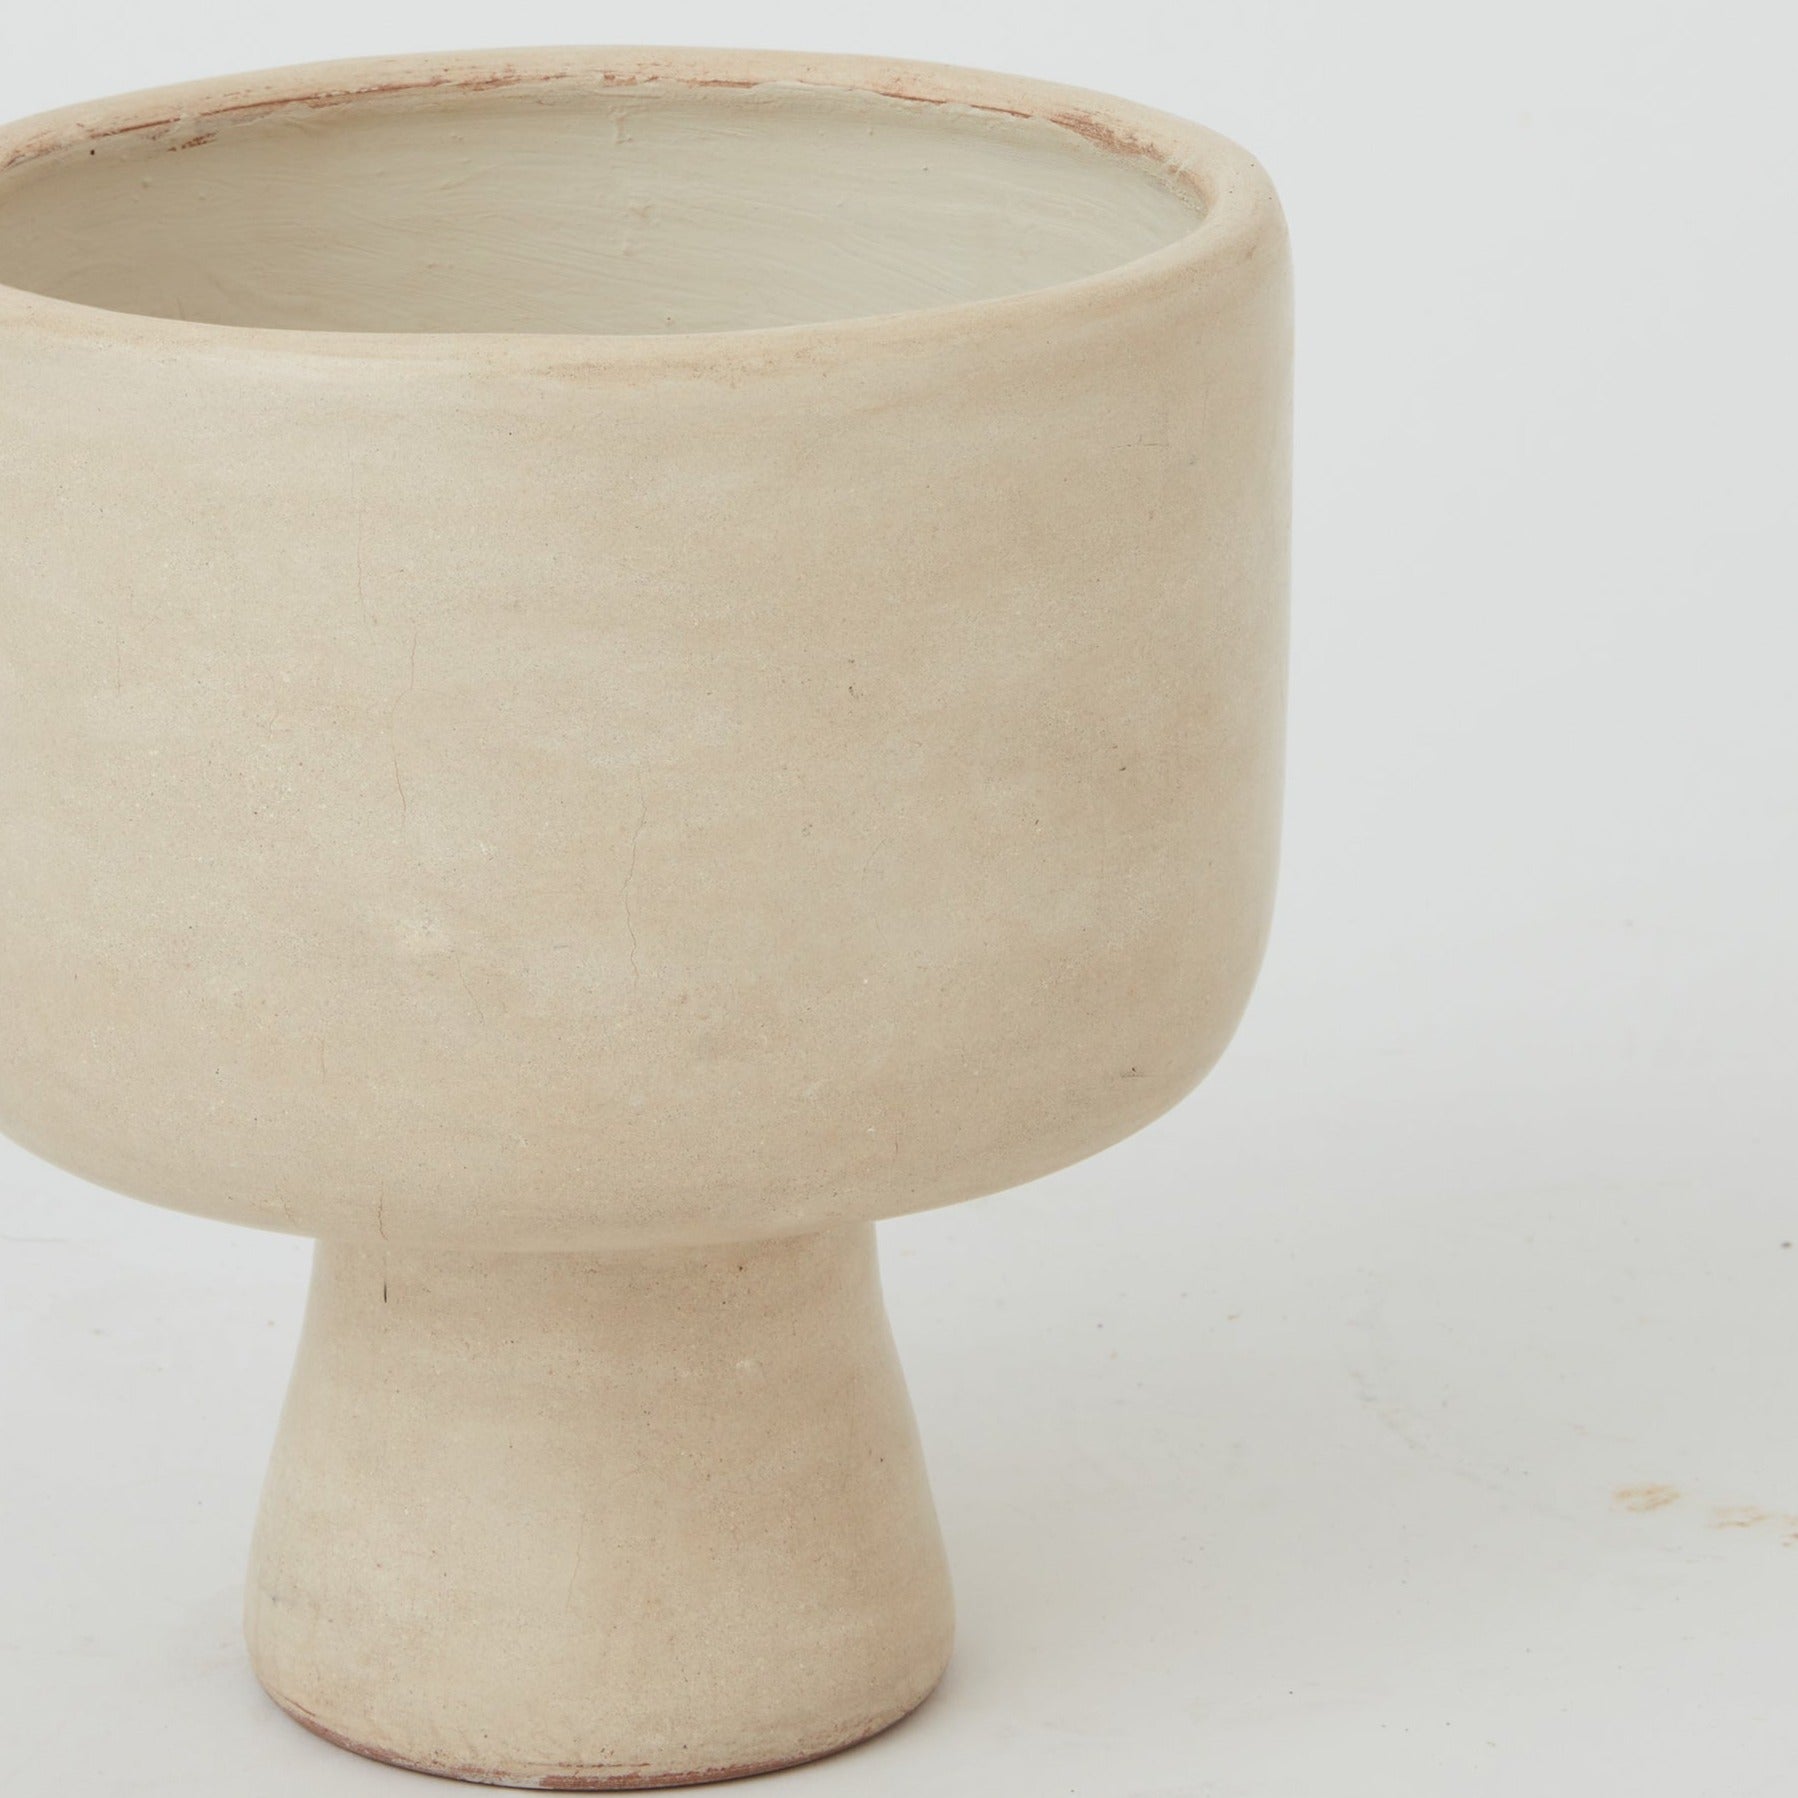 Small merino rendered offering bowl